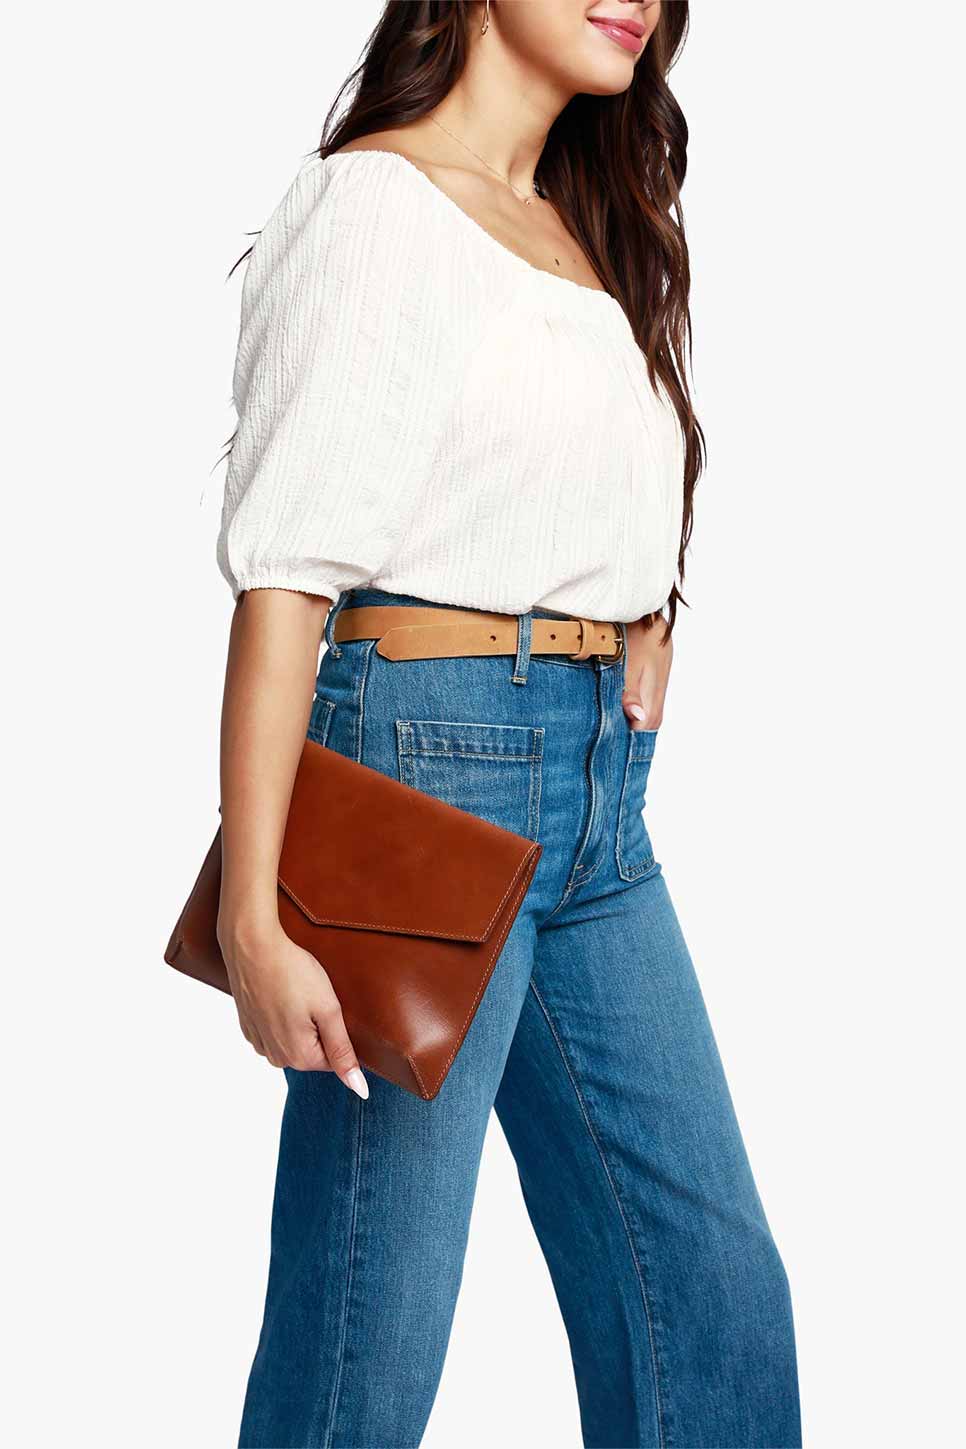 Able - Envelope Clutch - Whiskey - Model